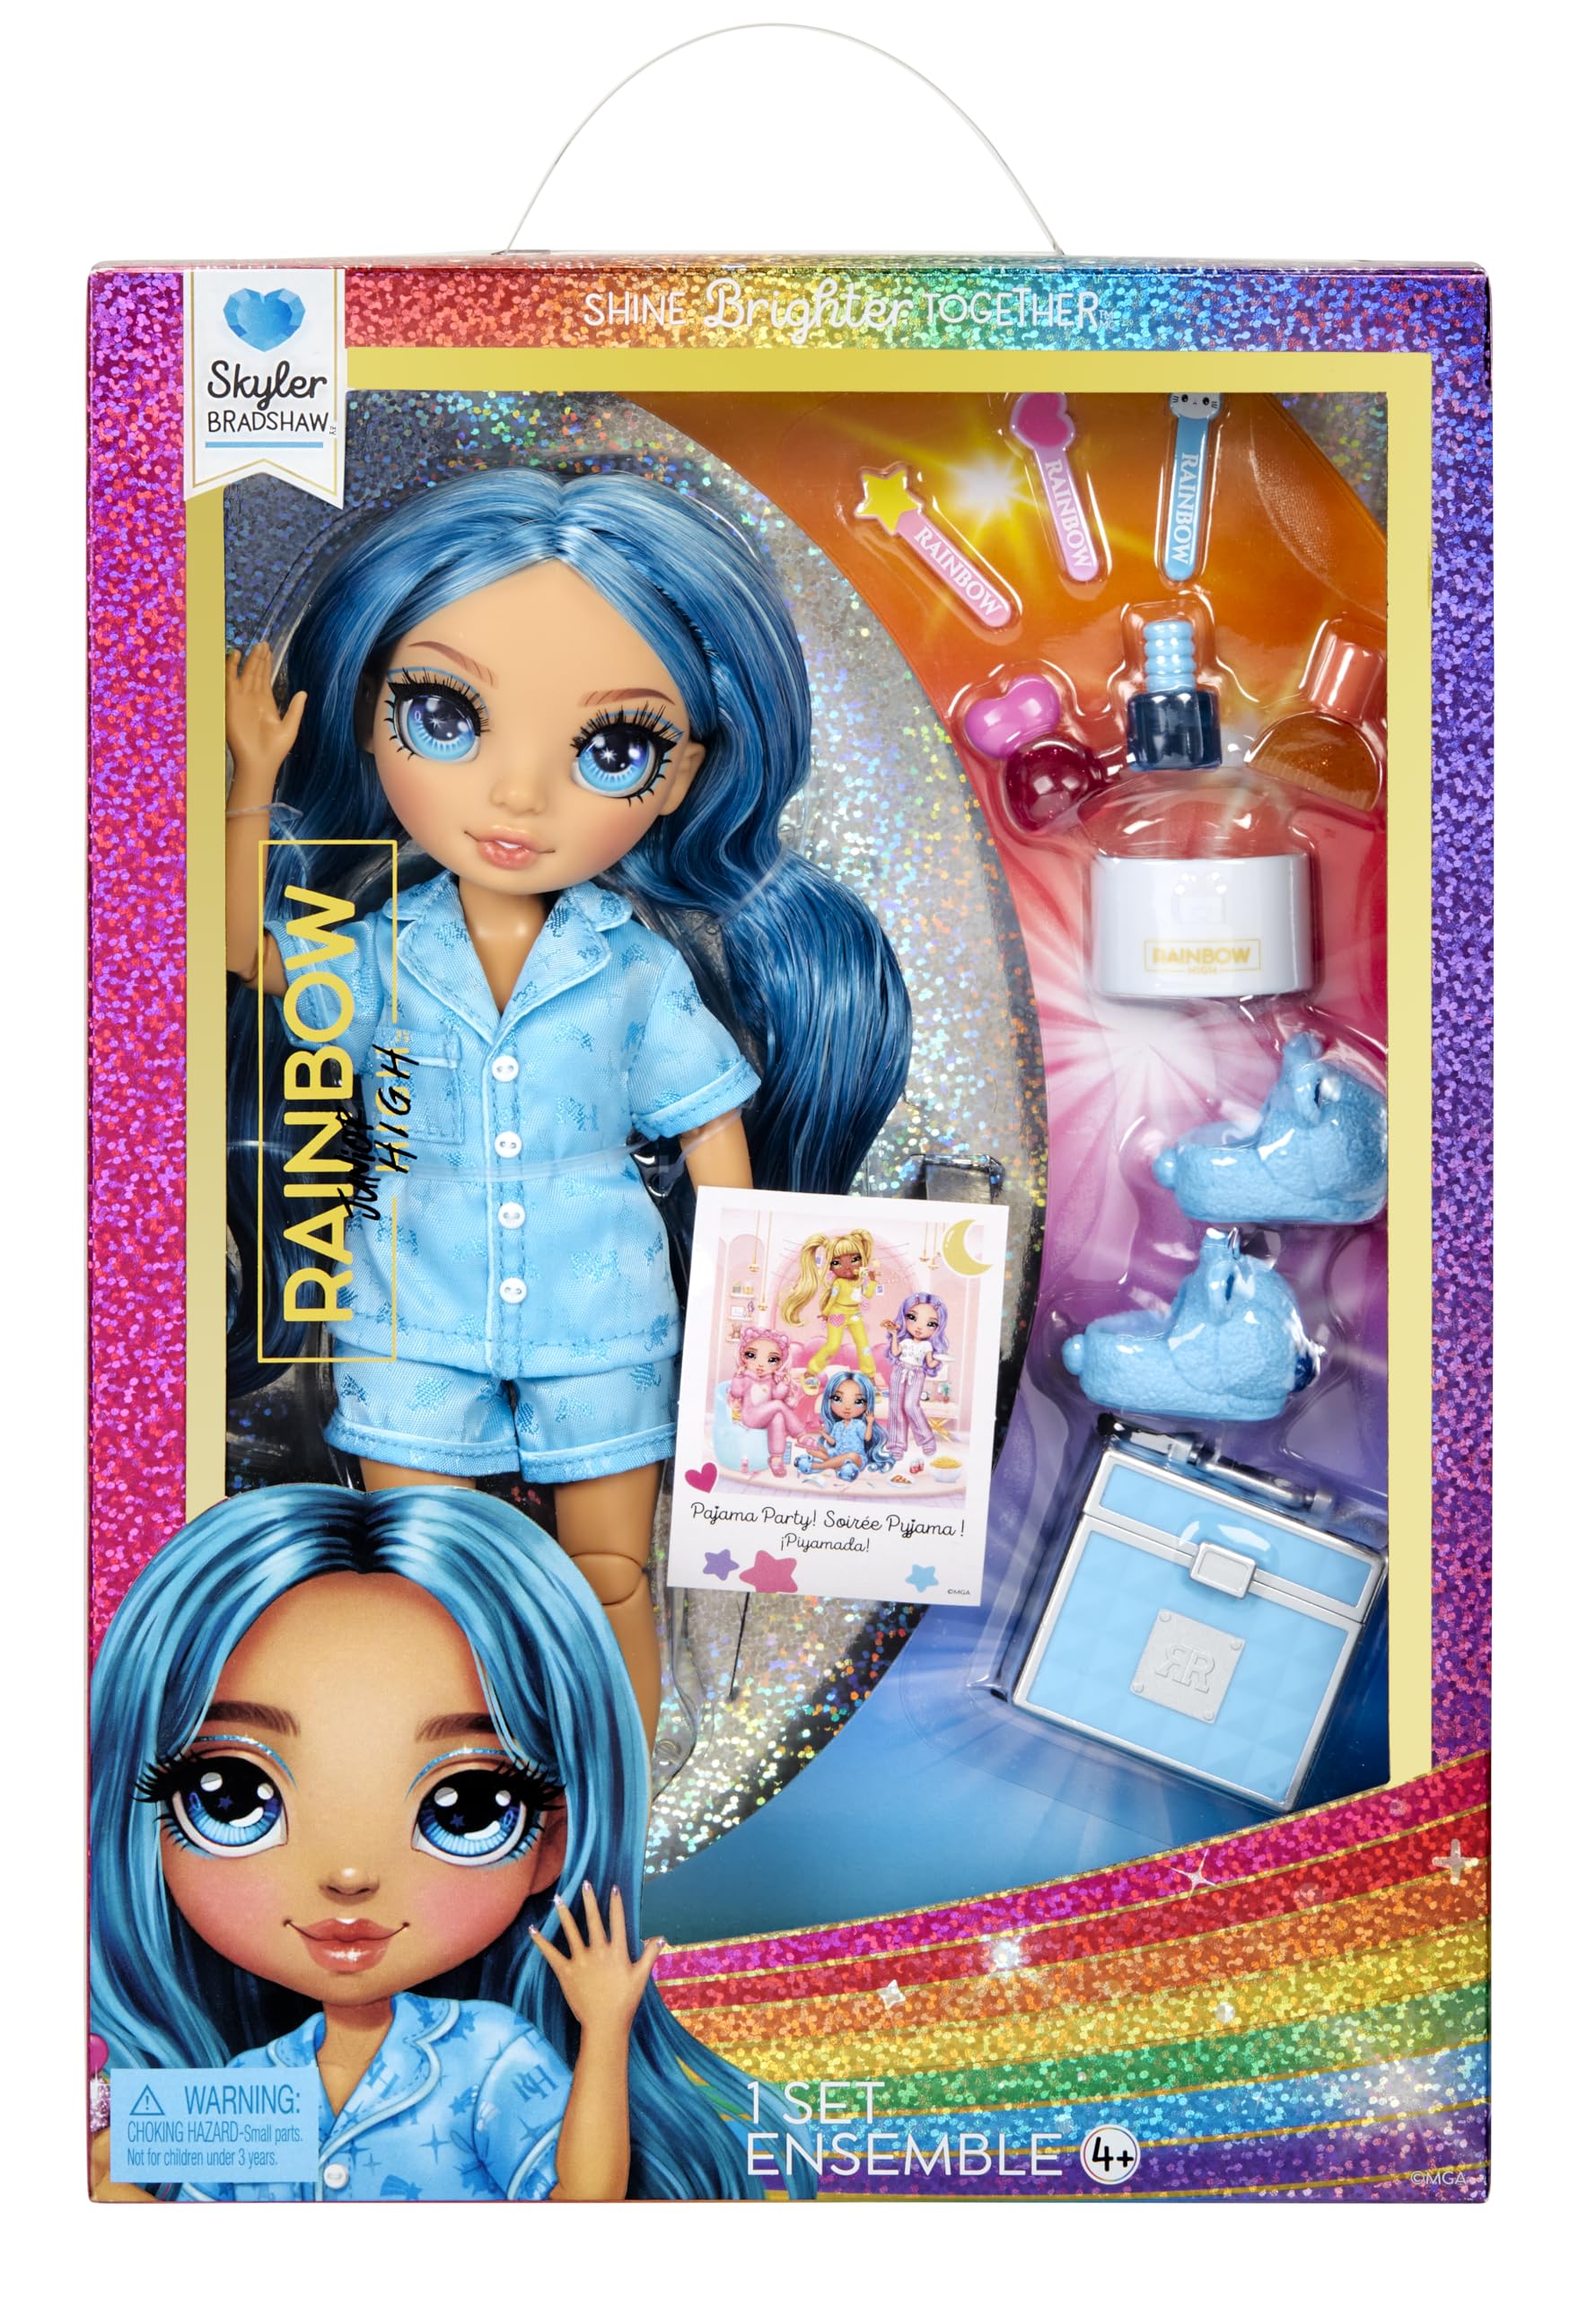 Rainbow High Jr High PJ Party-Skyler (Blue) 9” Posable Doll with Soft Onesie, Slippers, Play Accessories, Kids Toy Ages 4-12 Years